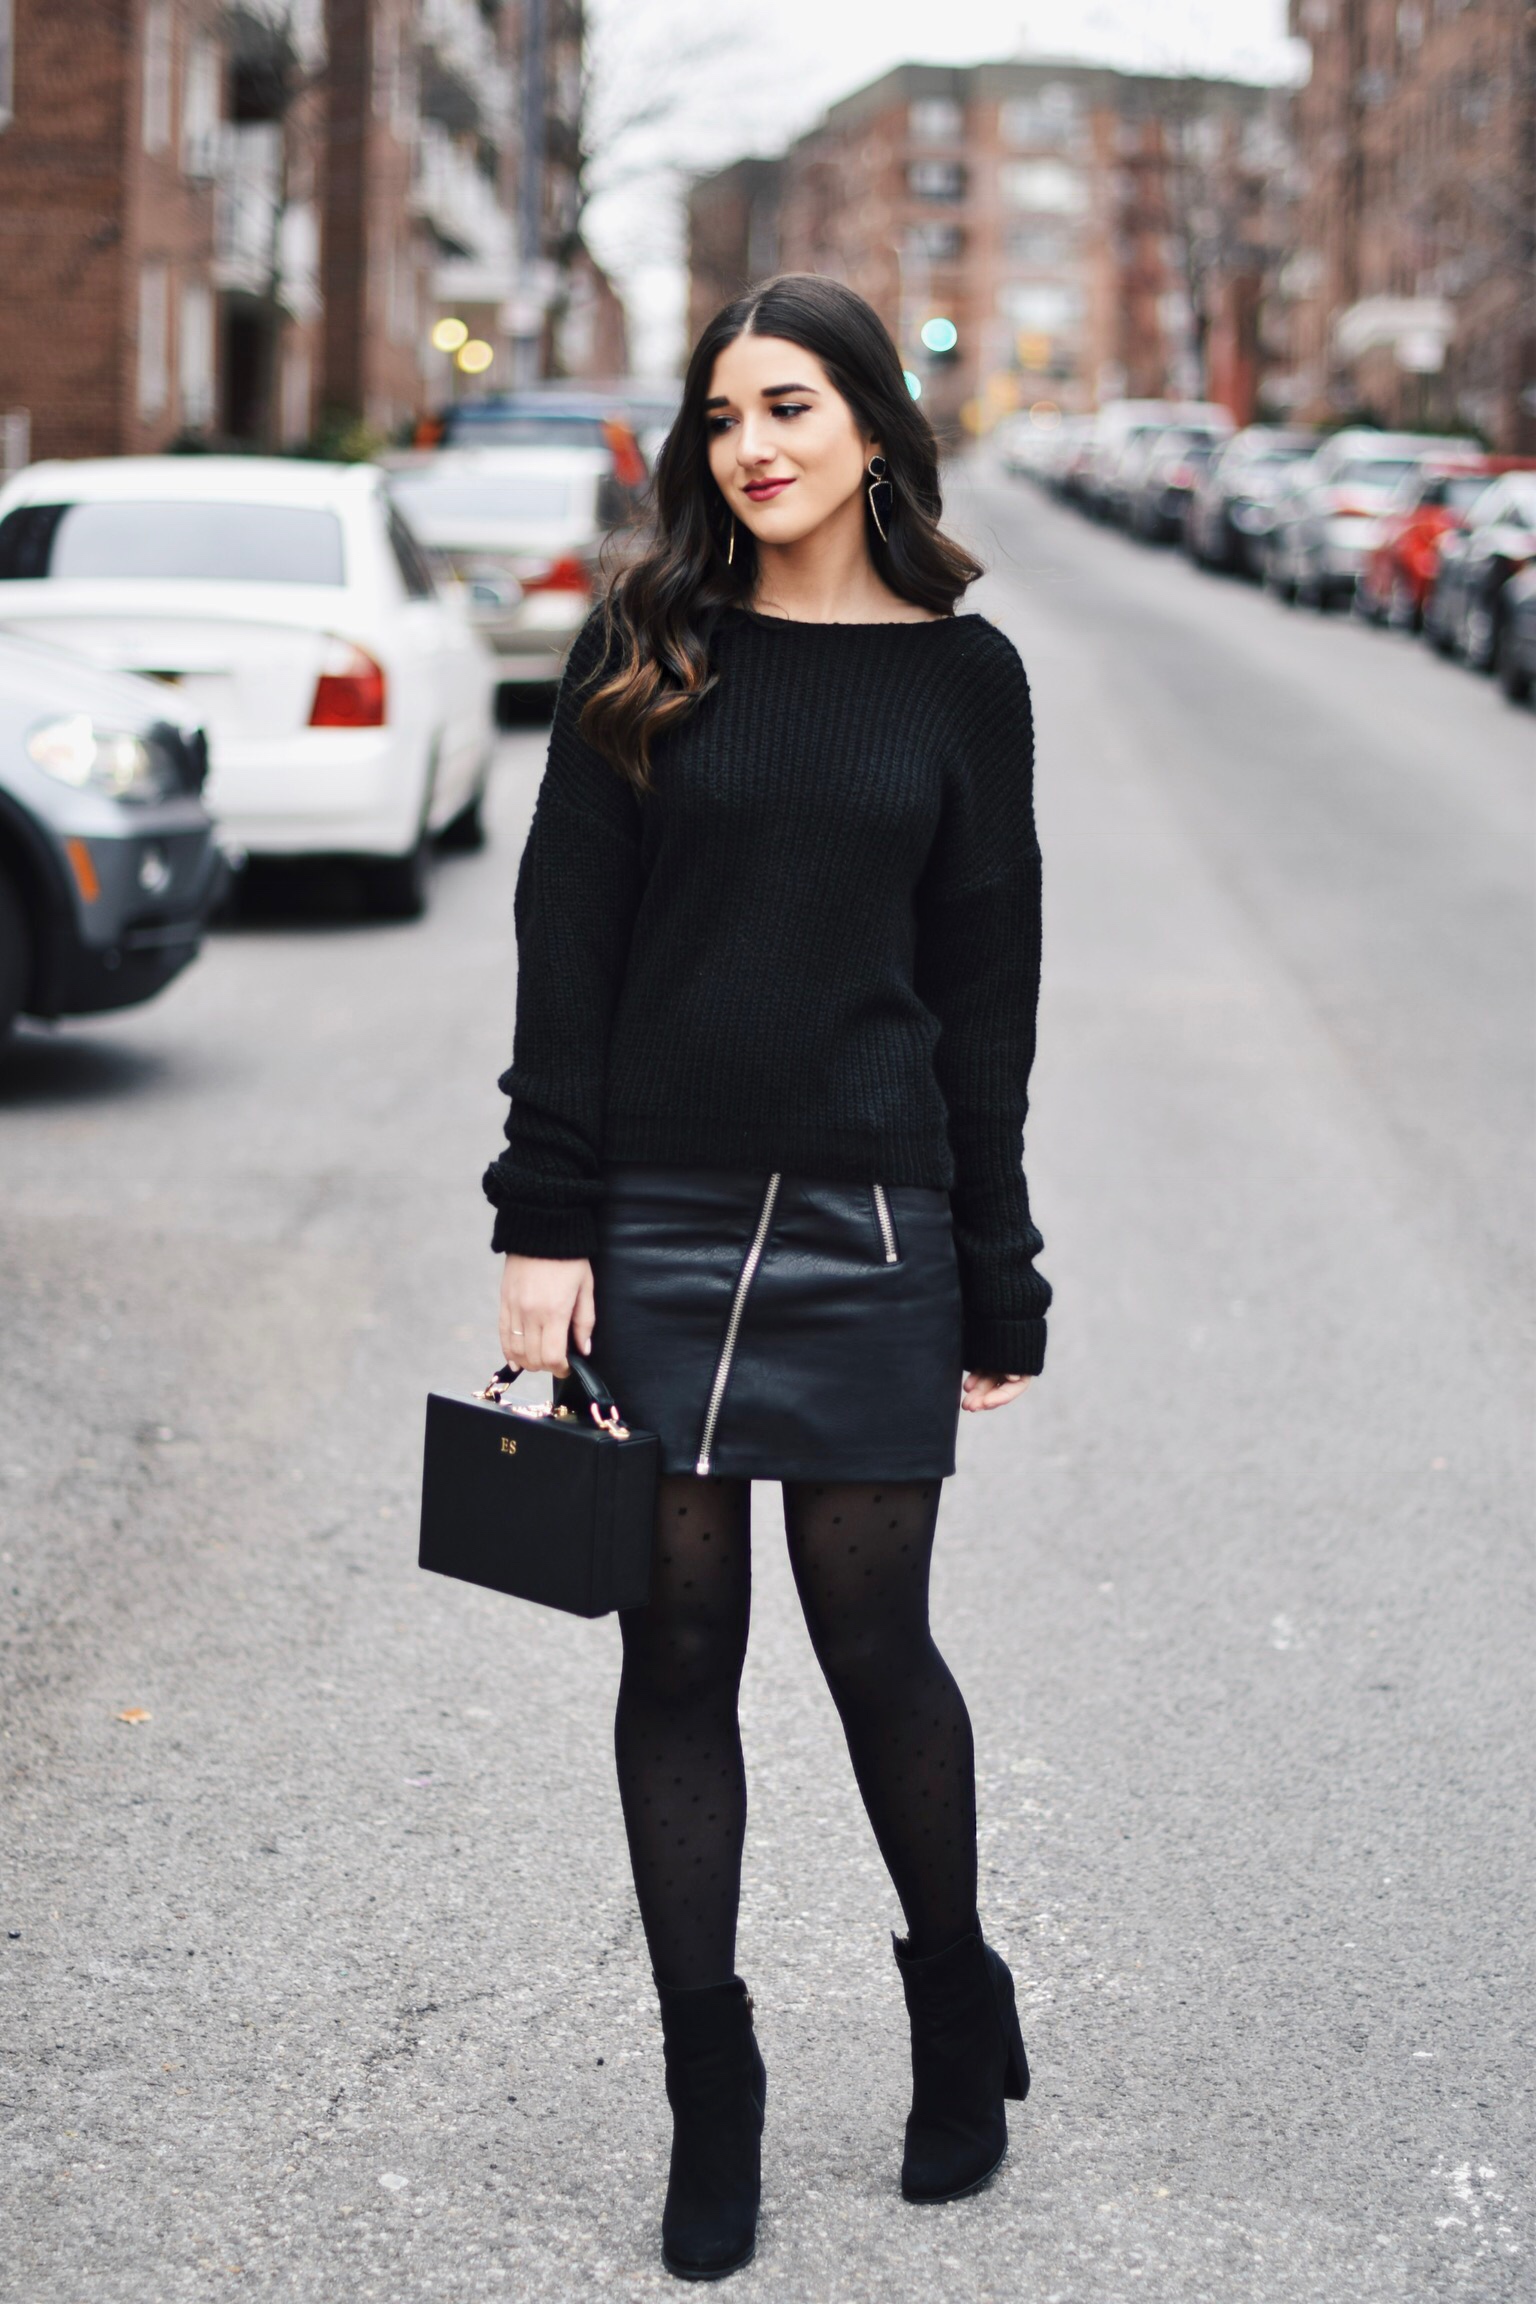 All Black Look 5 Ways To Keep Your New Year's Resolution Going Strong Esther Santer Fashion Blog NYC Street Style Blogger Outfit OOTD Trendy BaubleBar Earrings Monogrammed Box Bag Daily Edited  Girl Women Booties Pleather Mini Skirt Polka Dot Tights.jpg